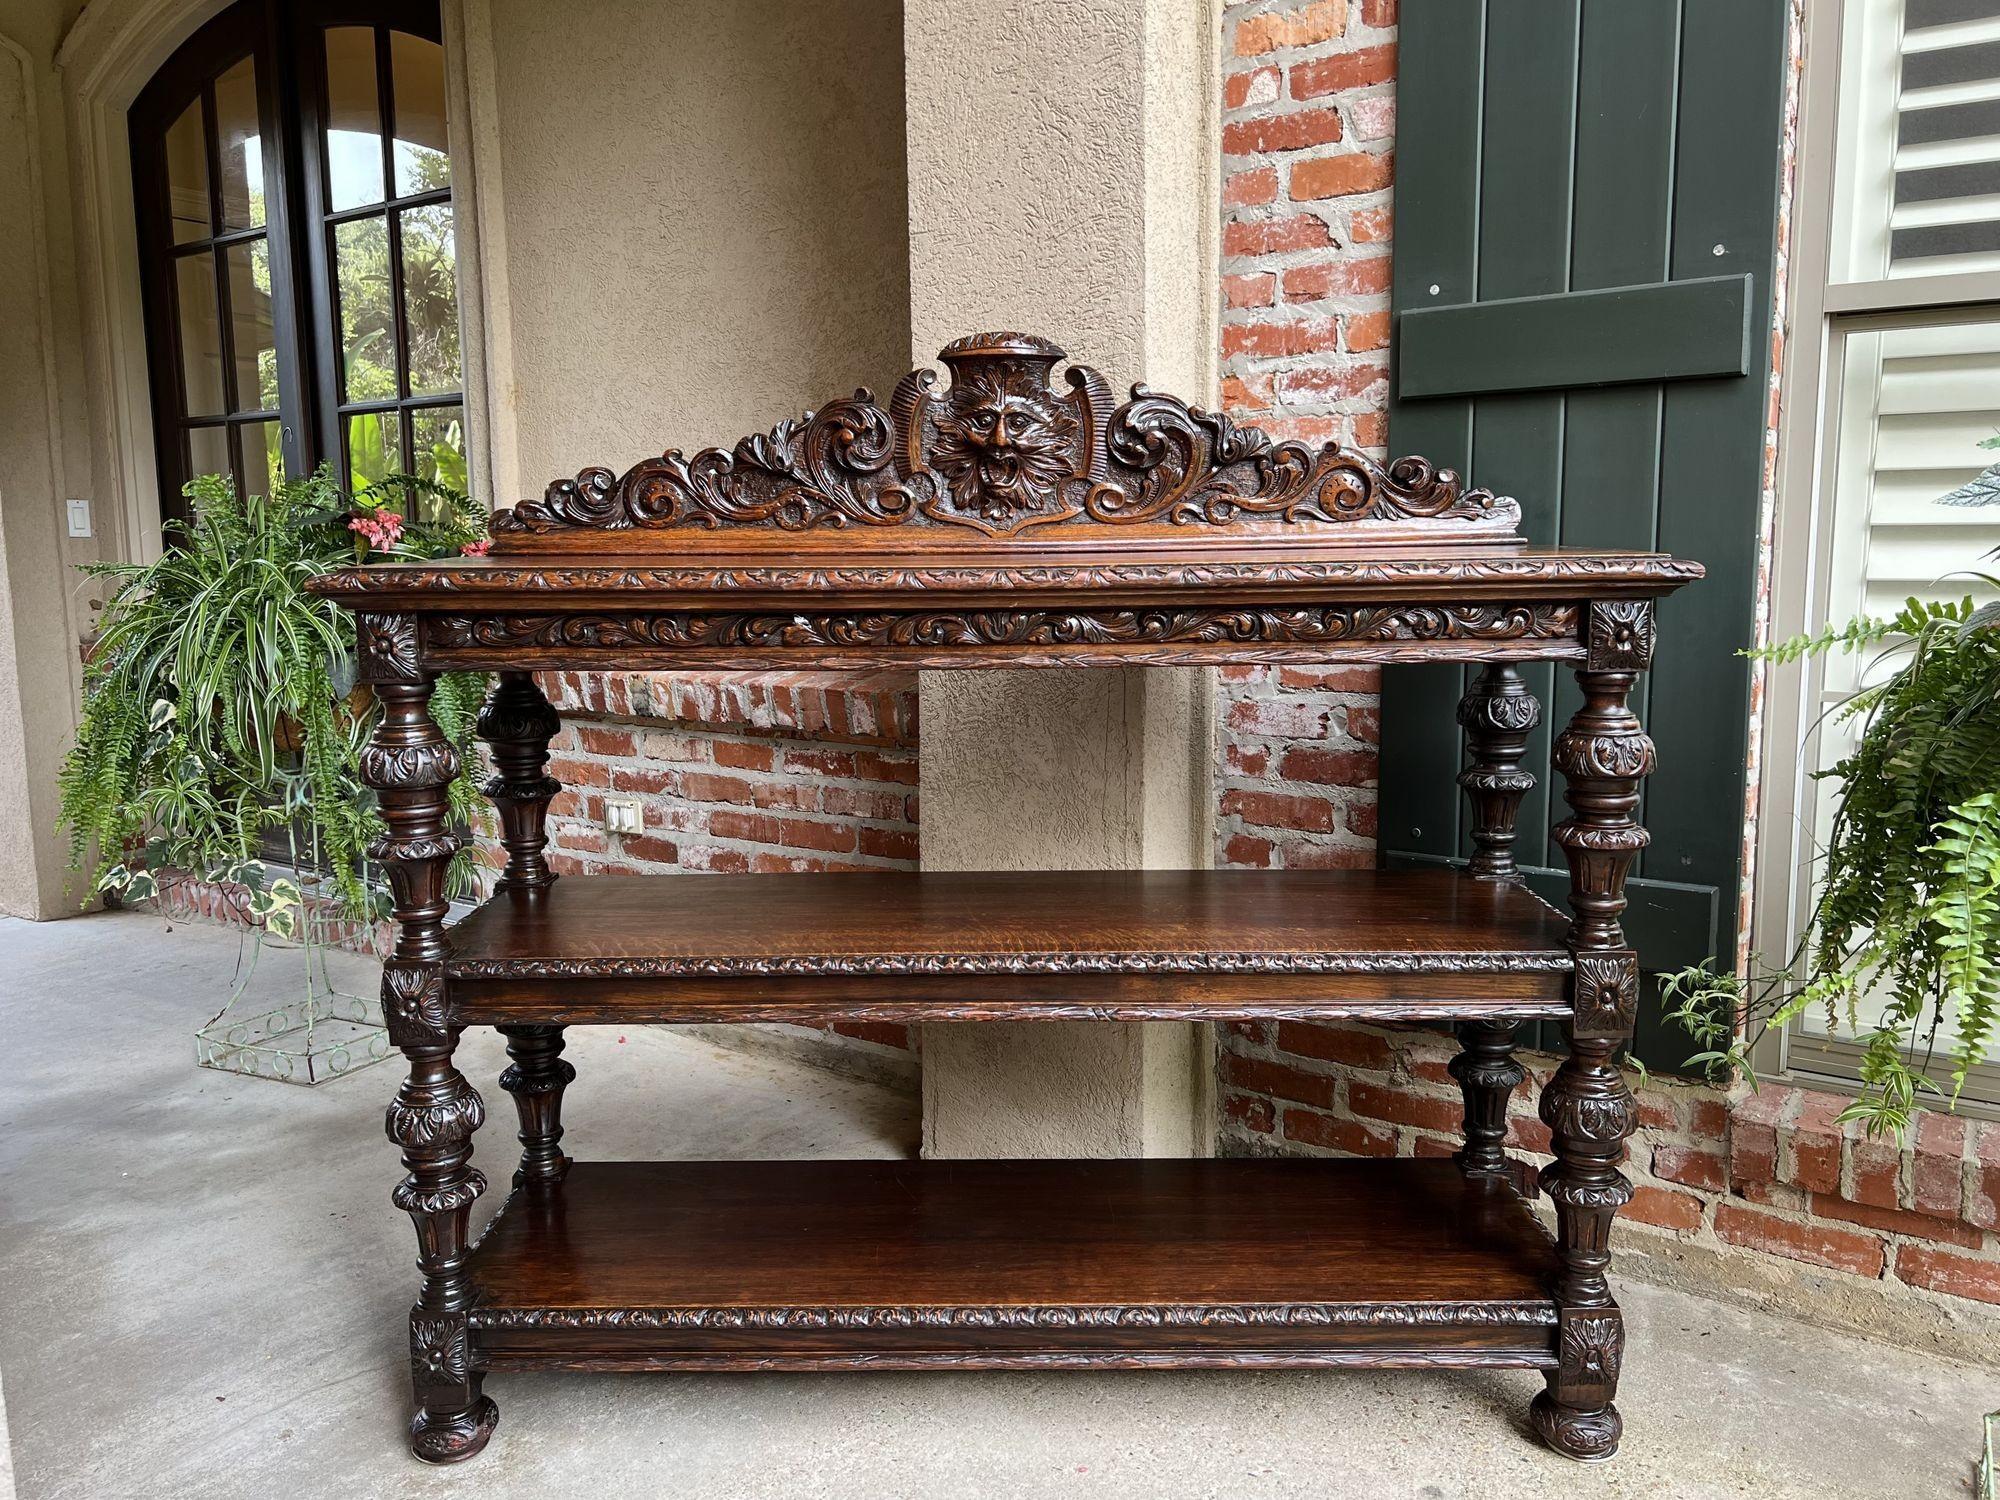 19th century French Carved Oak sideboard server table Renaissance Bar Shelf.
 
Direct from France, a gorgeous, highly carved 19th century sideboard/server.
Large back crown, fully carved, center mask surrounded with carved scrolls and foliate.